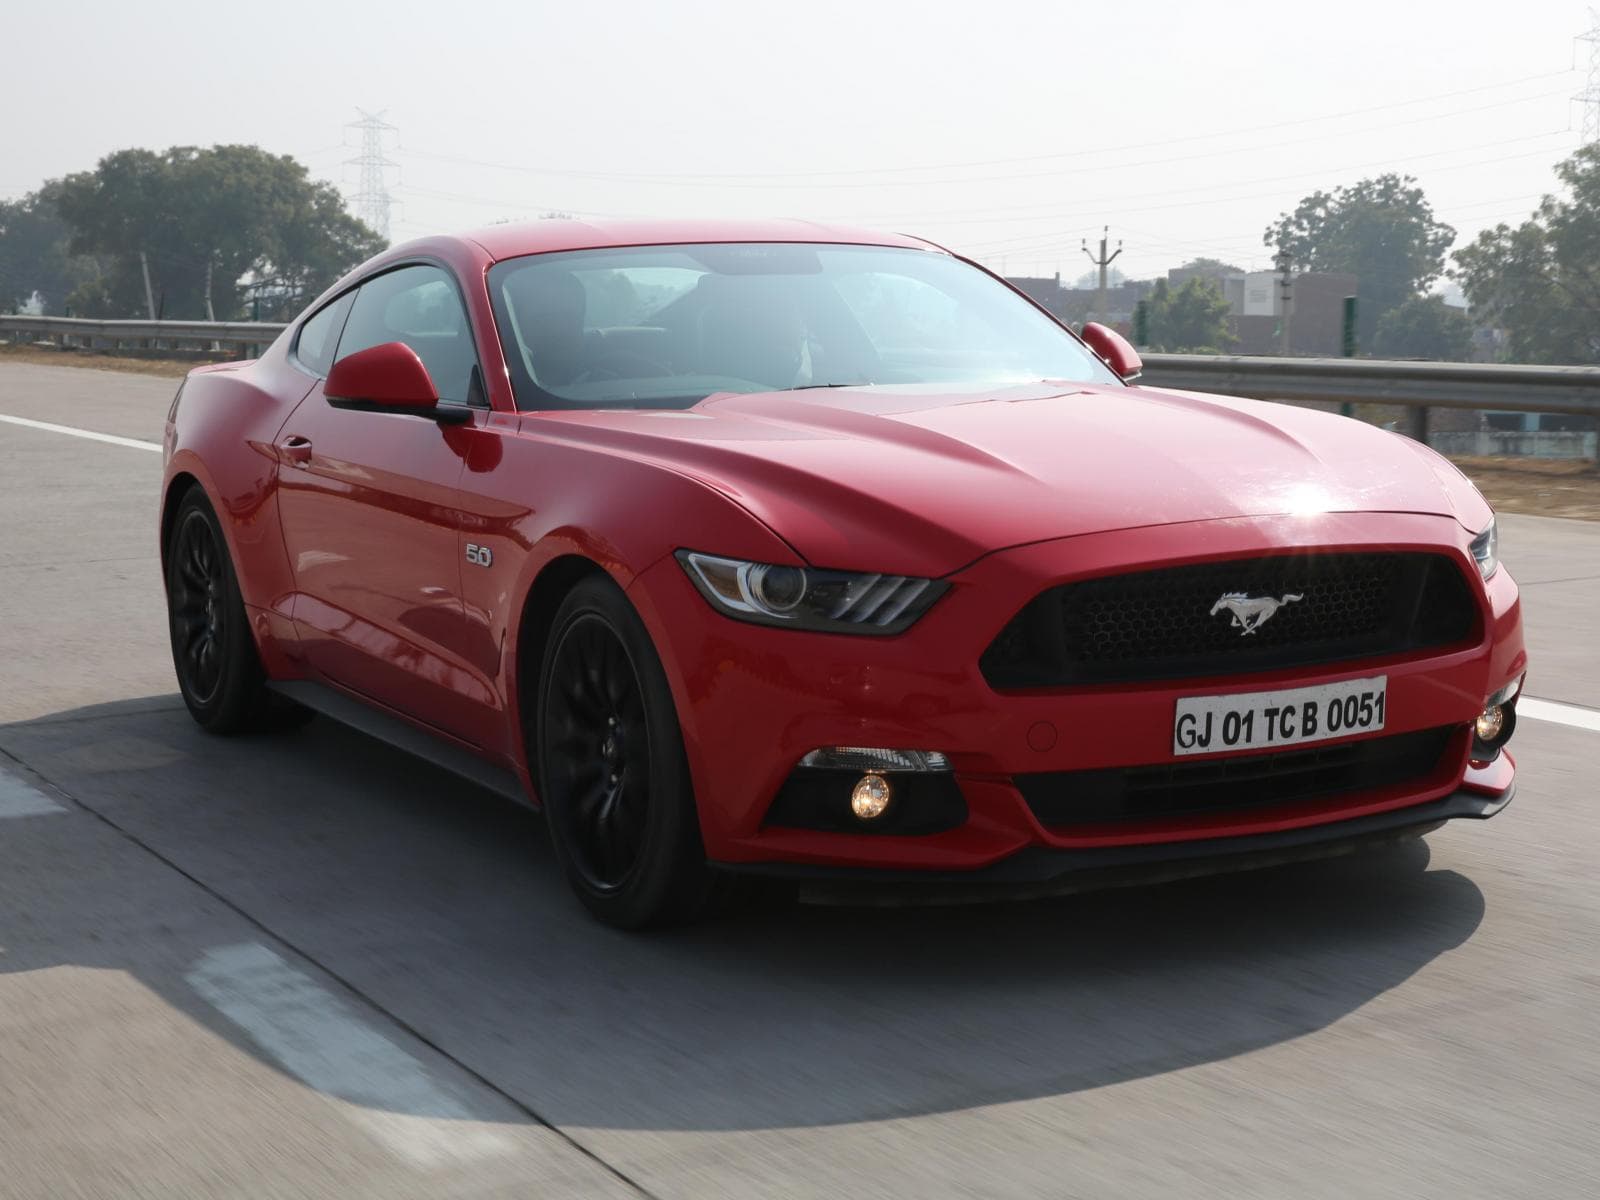 Ford Mustang wallpaper, free download